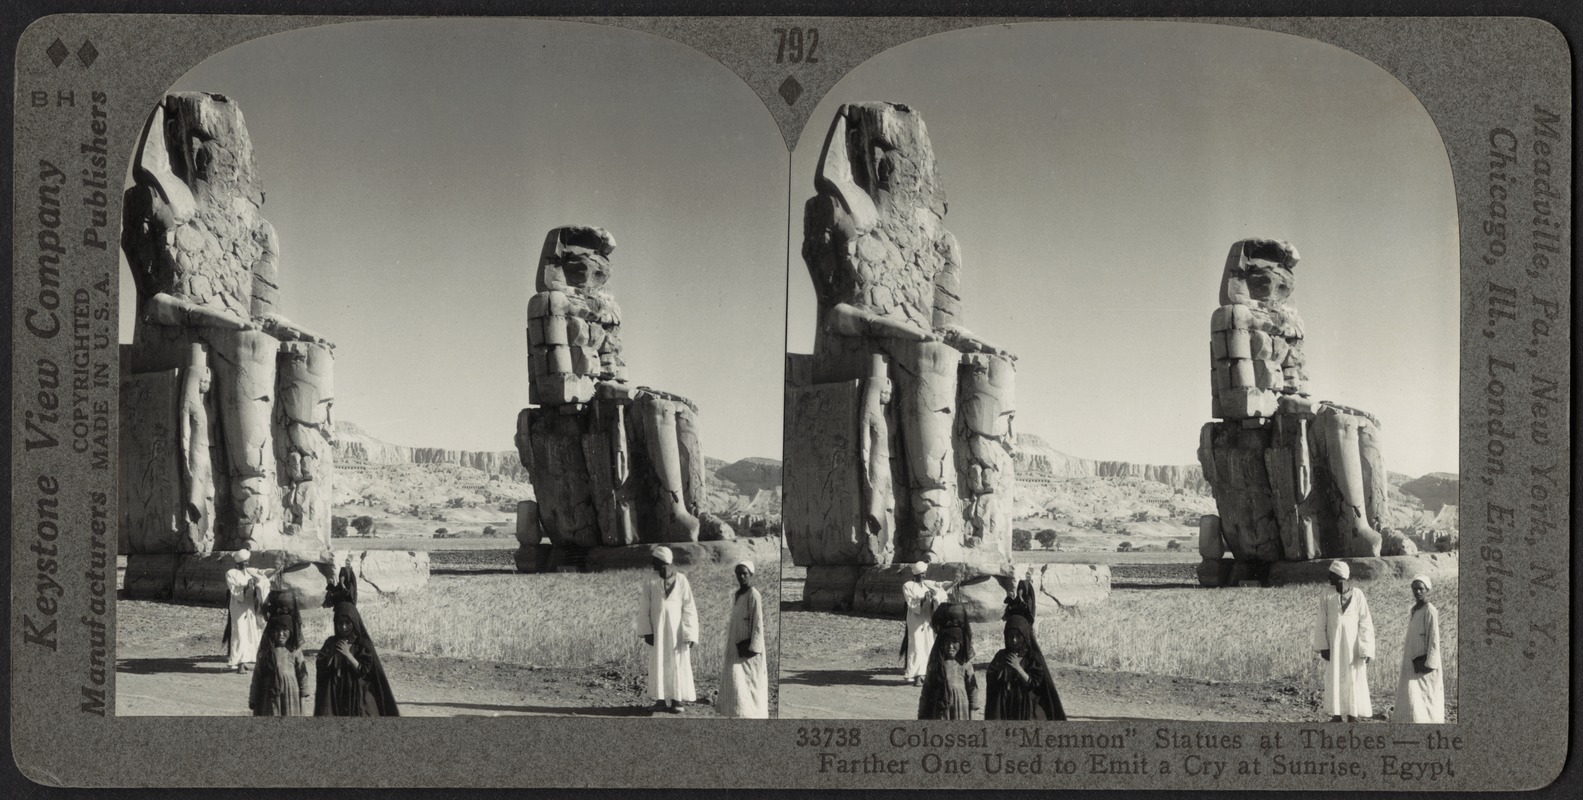 Colossal "Memnon" statues at Thebes, Egypt